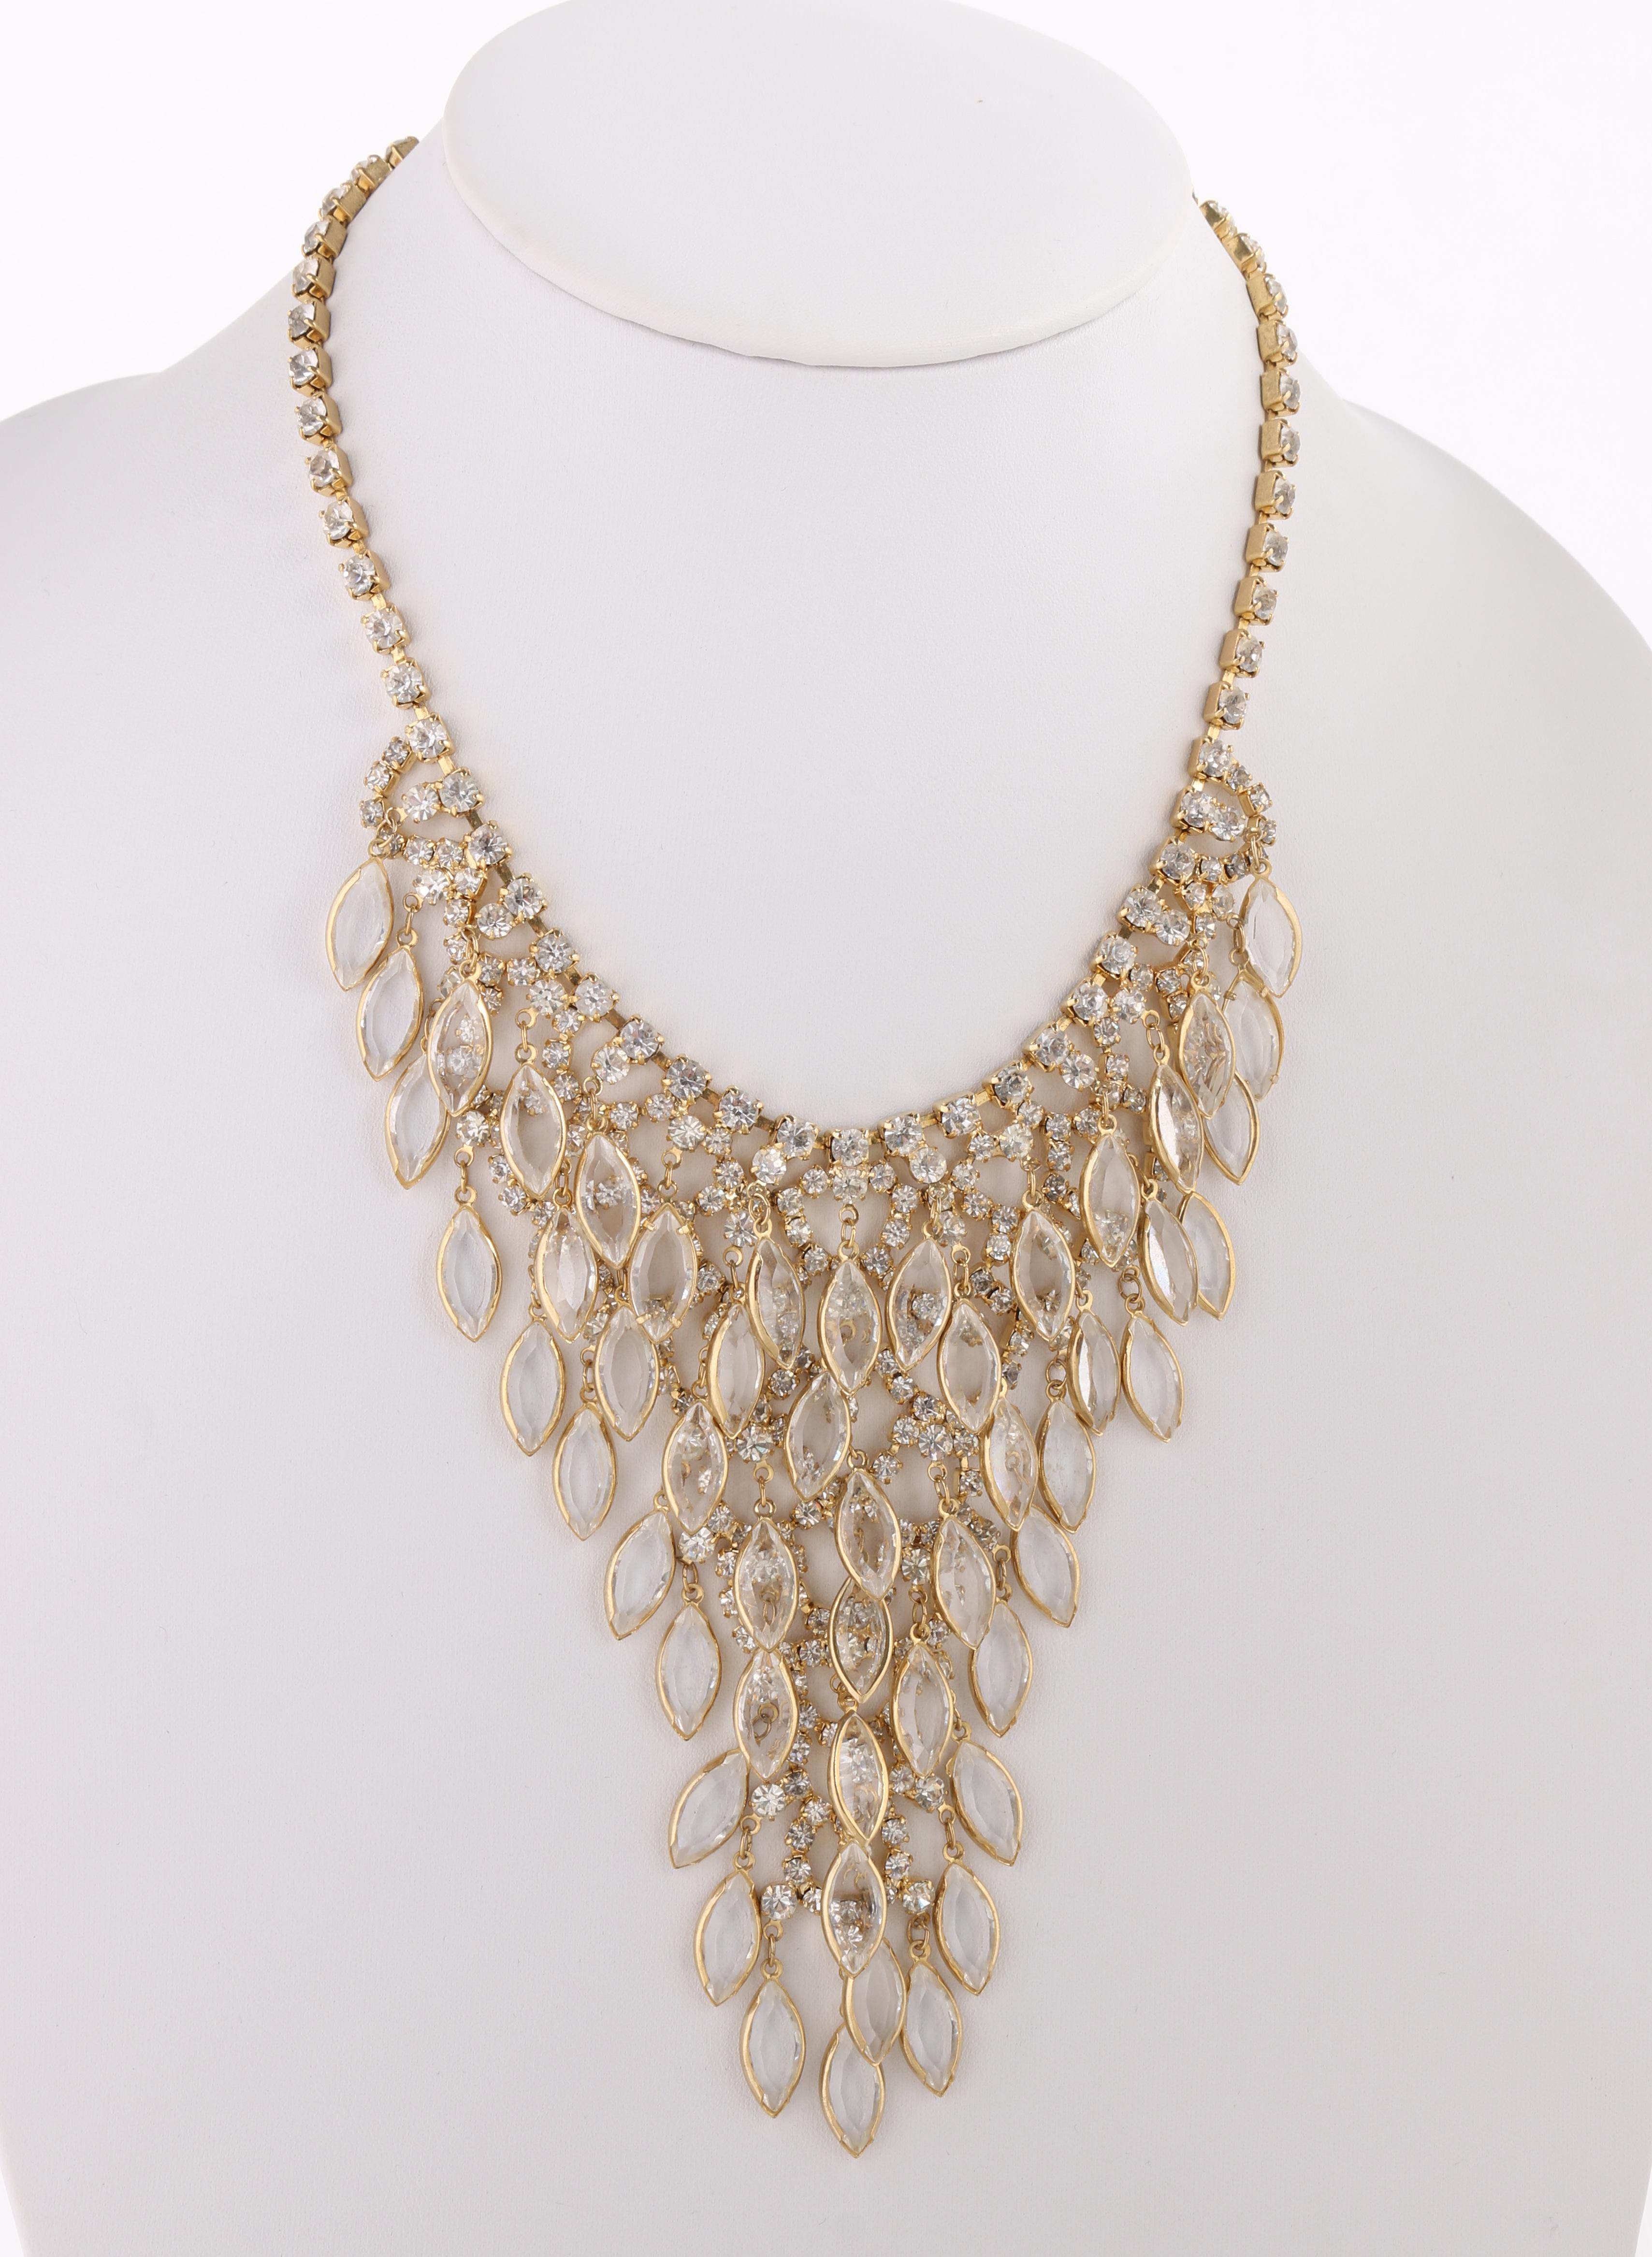 DESCRIPTION: JULIANA D&E c.1960's Gold Crystal Rhinestone Waterfall Chandelier Bib Necklace
 
Circa: c.1960’s
Markings: None
Designer: Delizza & Elster
Style: Waterfall bib necklace
Color(s): Gold-toned metal
Marked Material: 
Unmarked Material